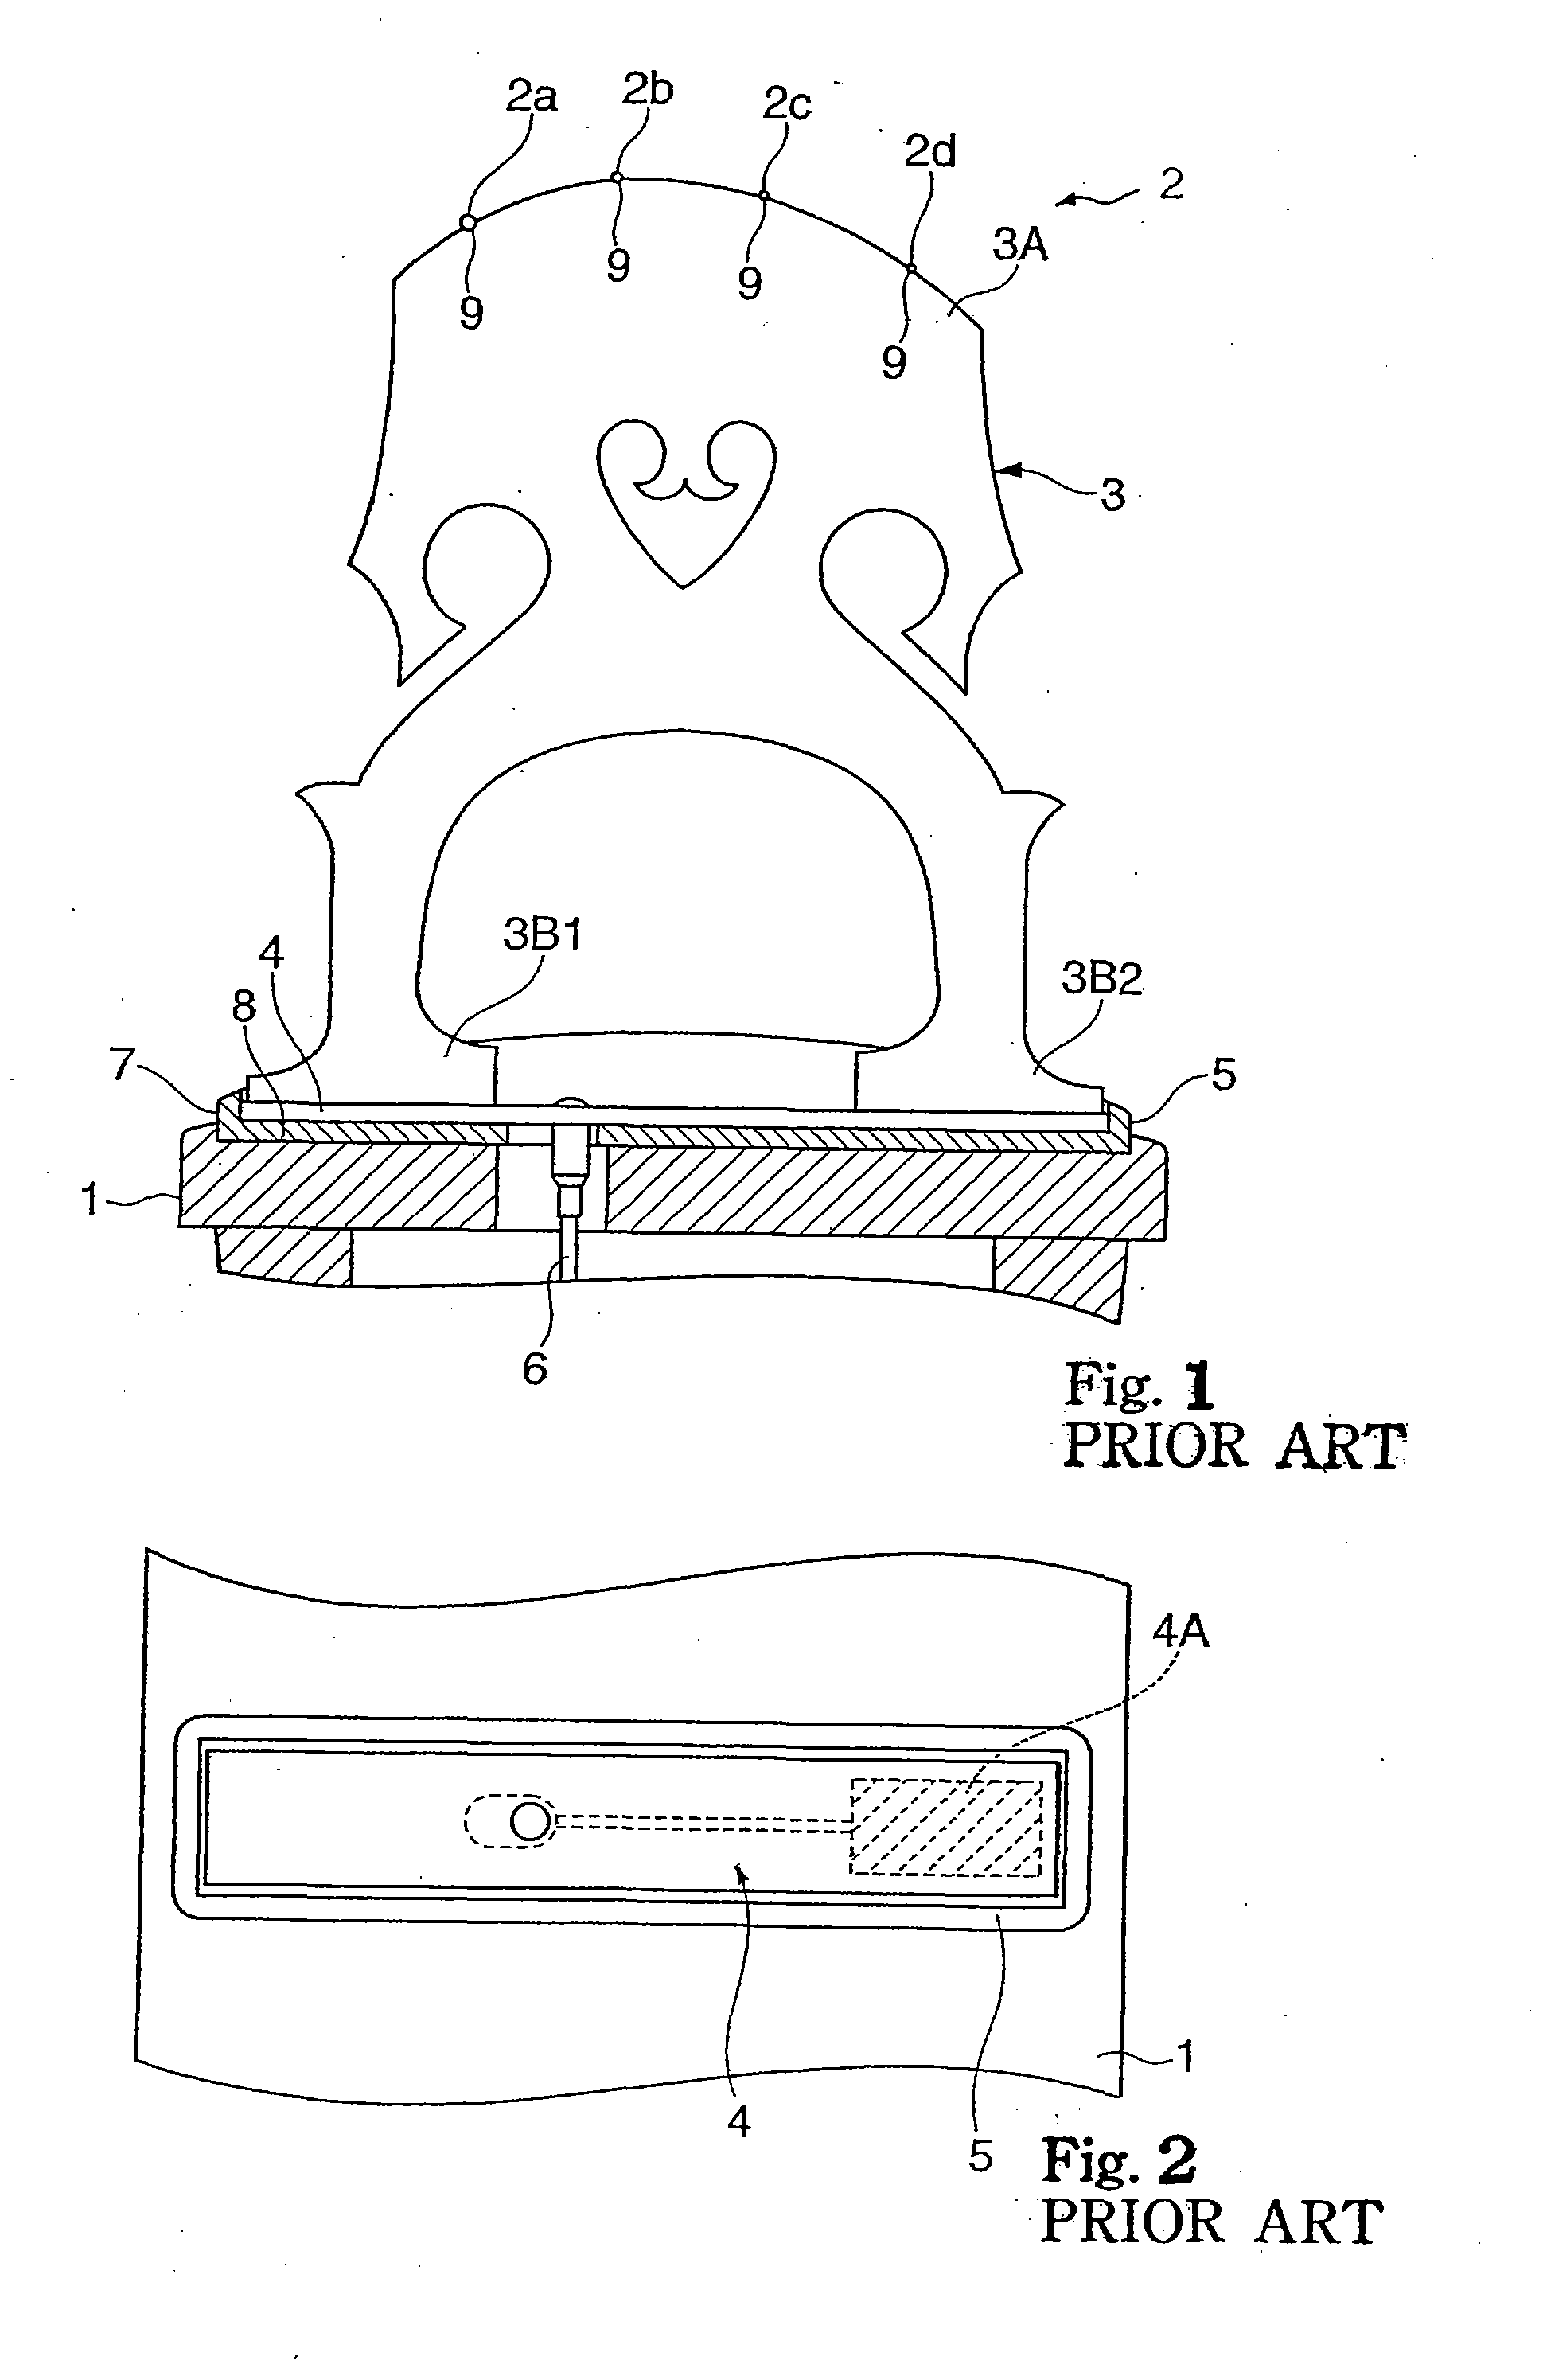 Electric stringed musical instrument and pickup unit incorporated therein for converting vibrations to signal